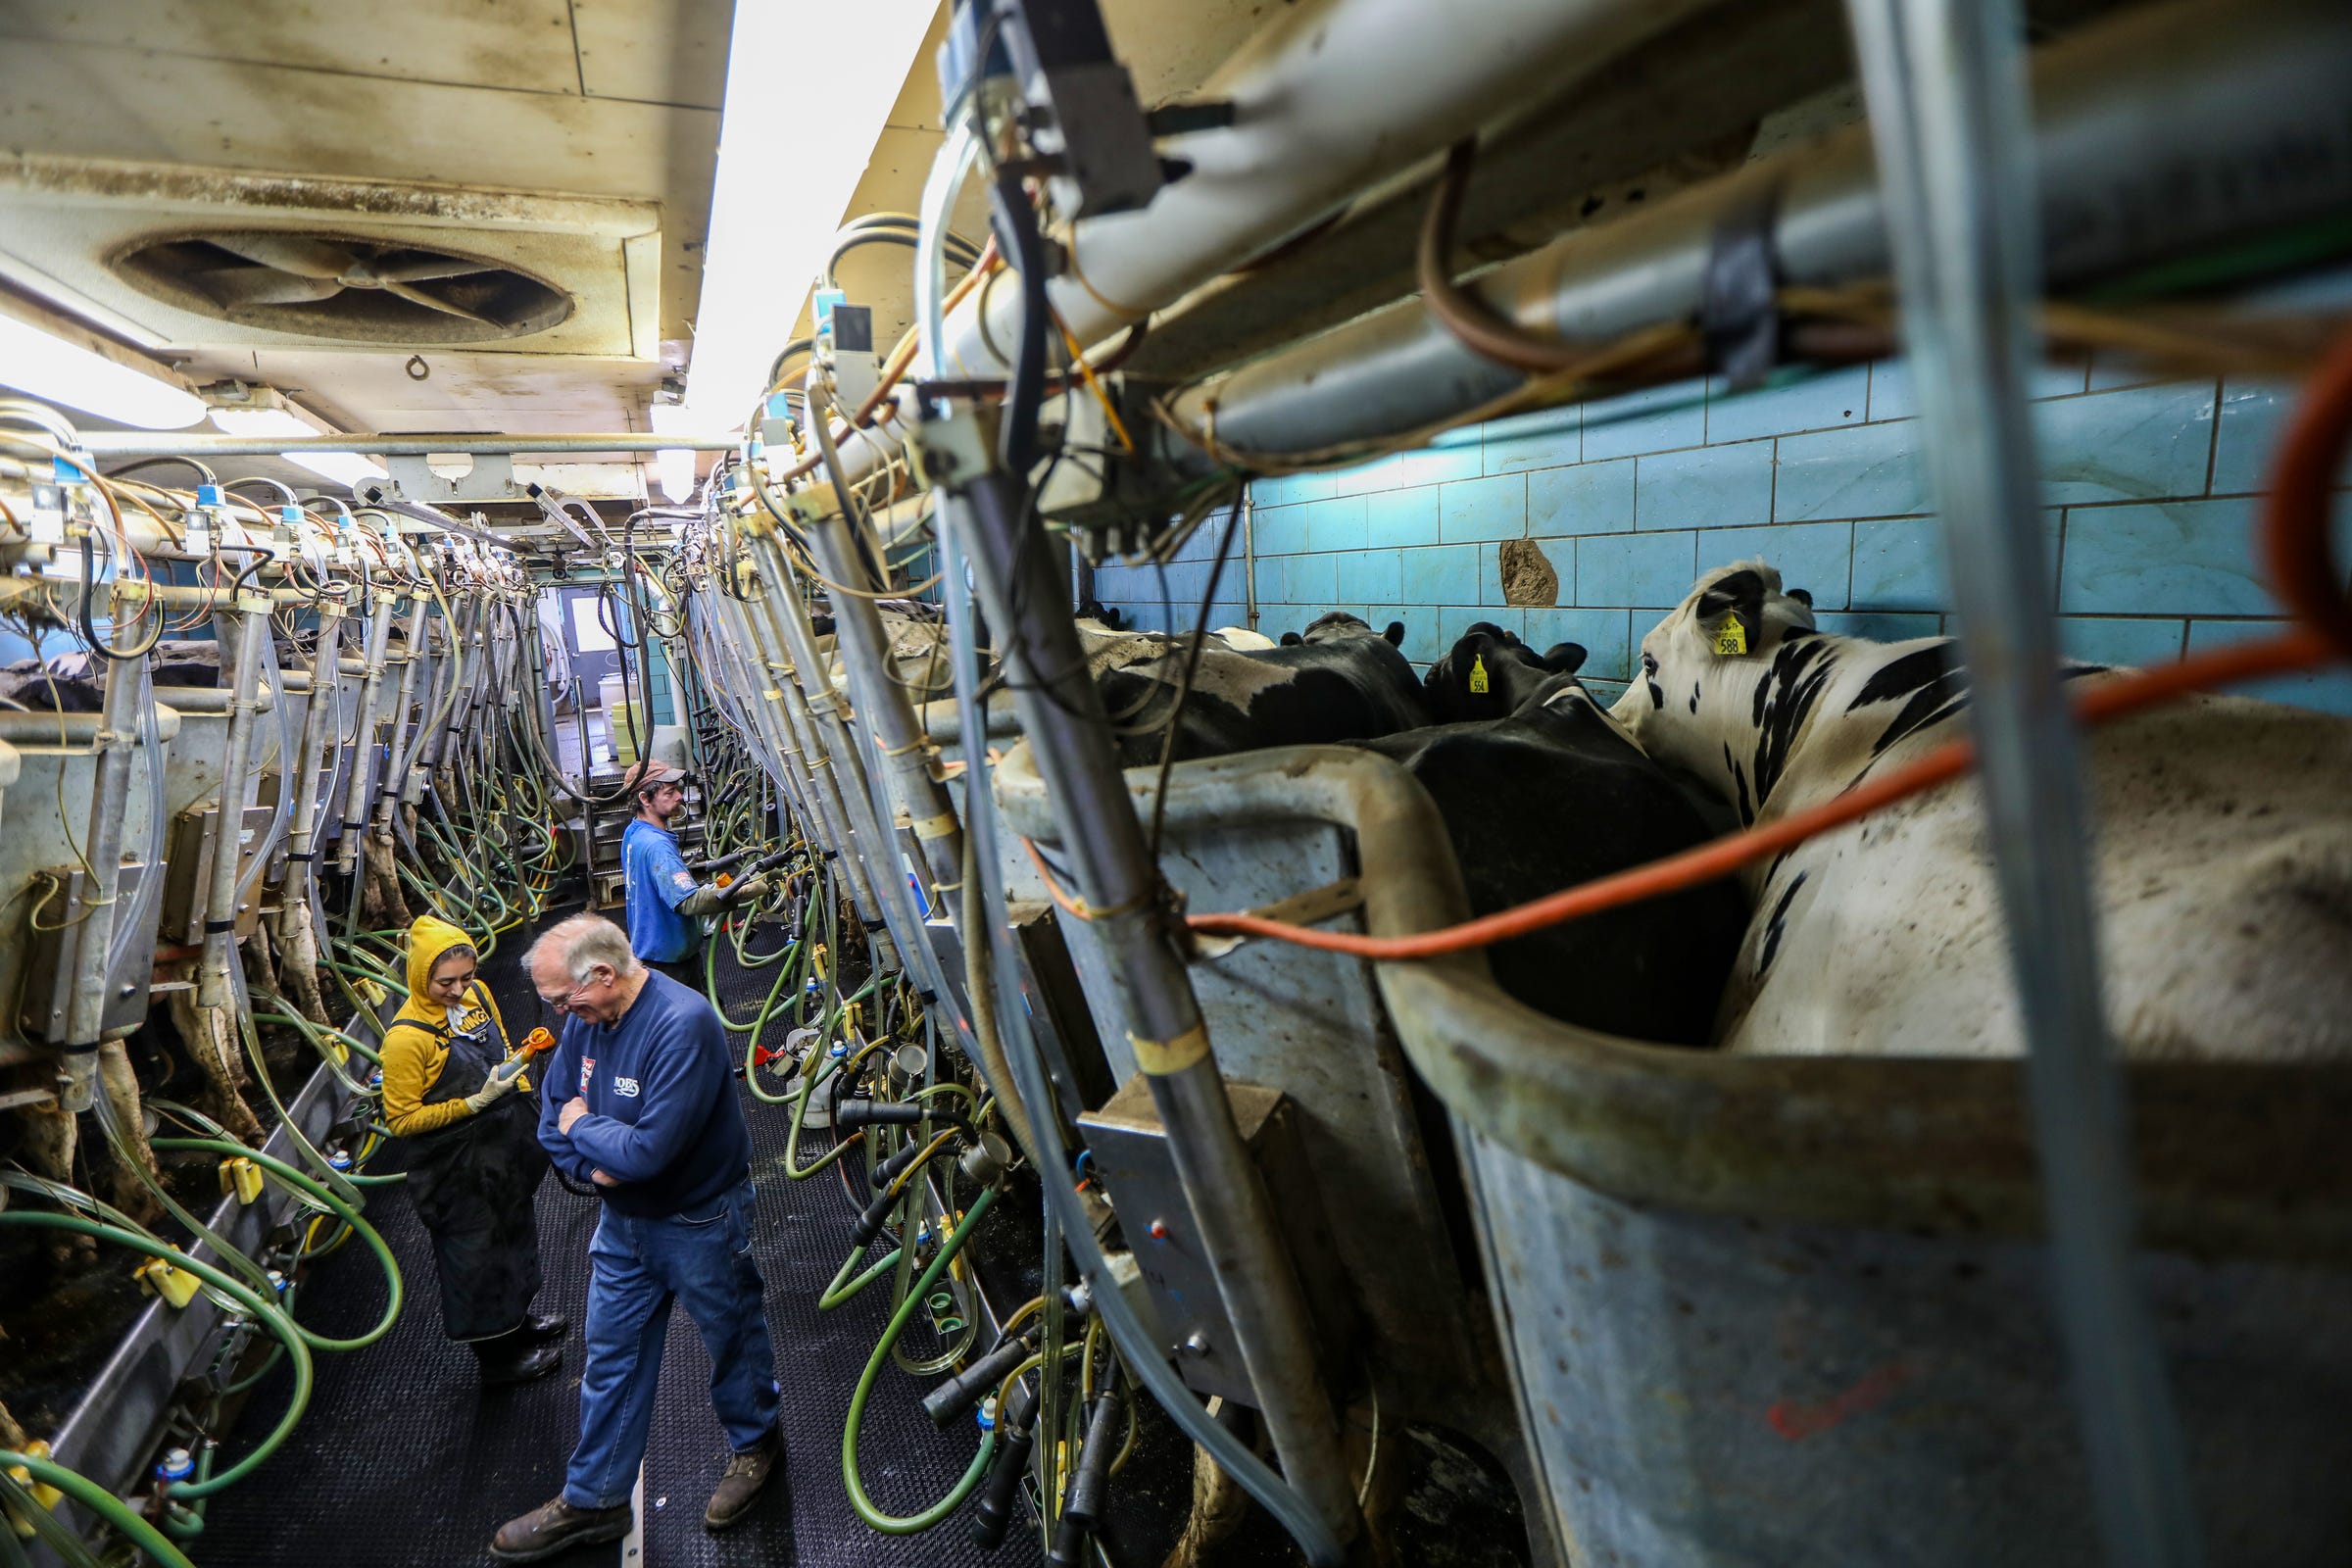 Guadalupe Flores, 23, of Ionia is a milker at Nobis Dairy Farm in St. Johns, Mich. and chats with Co-owner Ken Nobis, while working on Friday, April 24, 2020. Nobis Dairy Farm has 1,100 milk cows and also grows both feed for the cattle and some soybeans and corn on 3,000 acres in St. John, Mich. Cows eat a balanced combination of forage, grain, mineral supplements and protein-rich feeds such as soybean meal.  With the glut of milk driving down prices, that were already depressed before coronavirus, Nobis Dairy Farm will be making expensive purchases for seed and fertilizer for their cattle feed crops in the next couple of months. "The hole just keeps getting deeper and it gets harder to climb out of it," he said